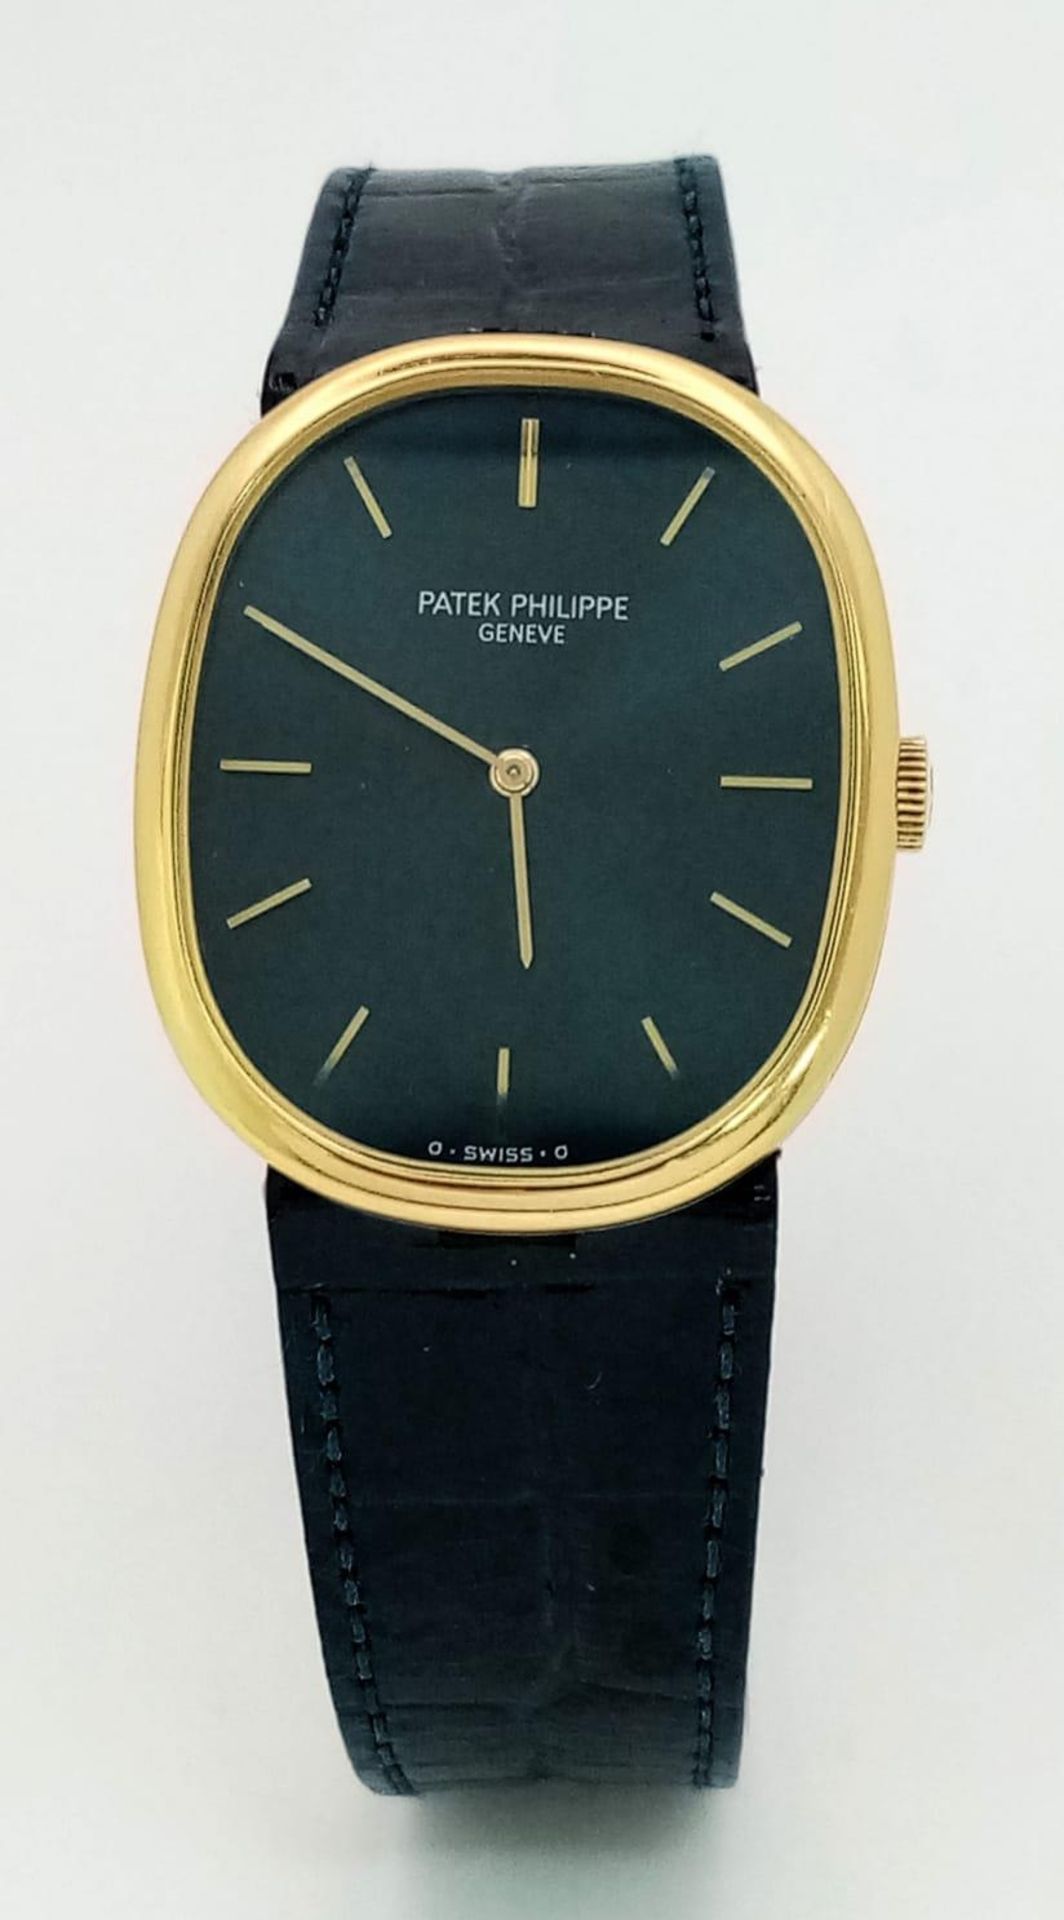 A PATEK PHILIPPE 18K GOLD LADIES WATCH ON ORIGINAL BLUE LEATHER STRAP THAT MATCHES THE STUNNING BLUE